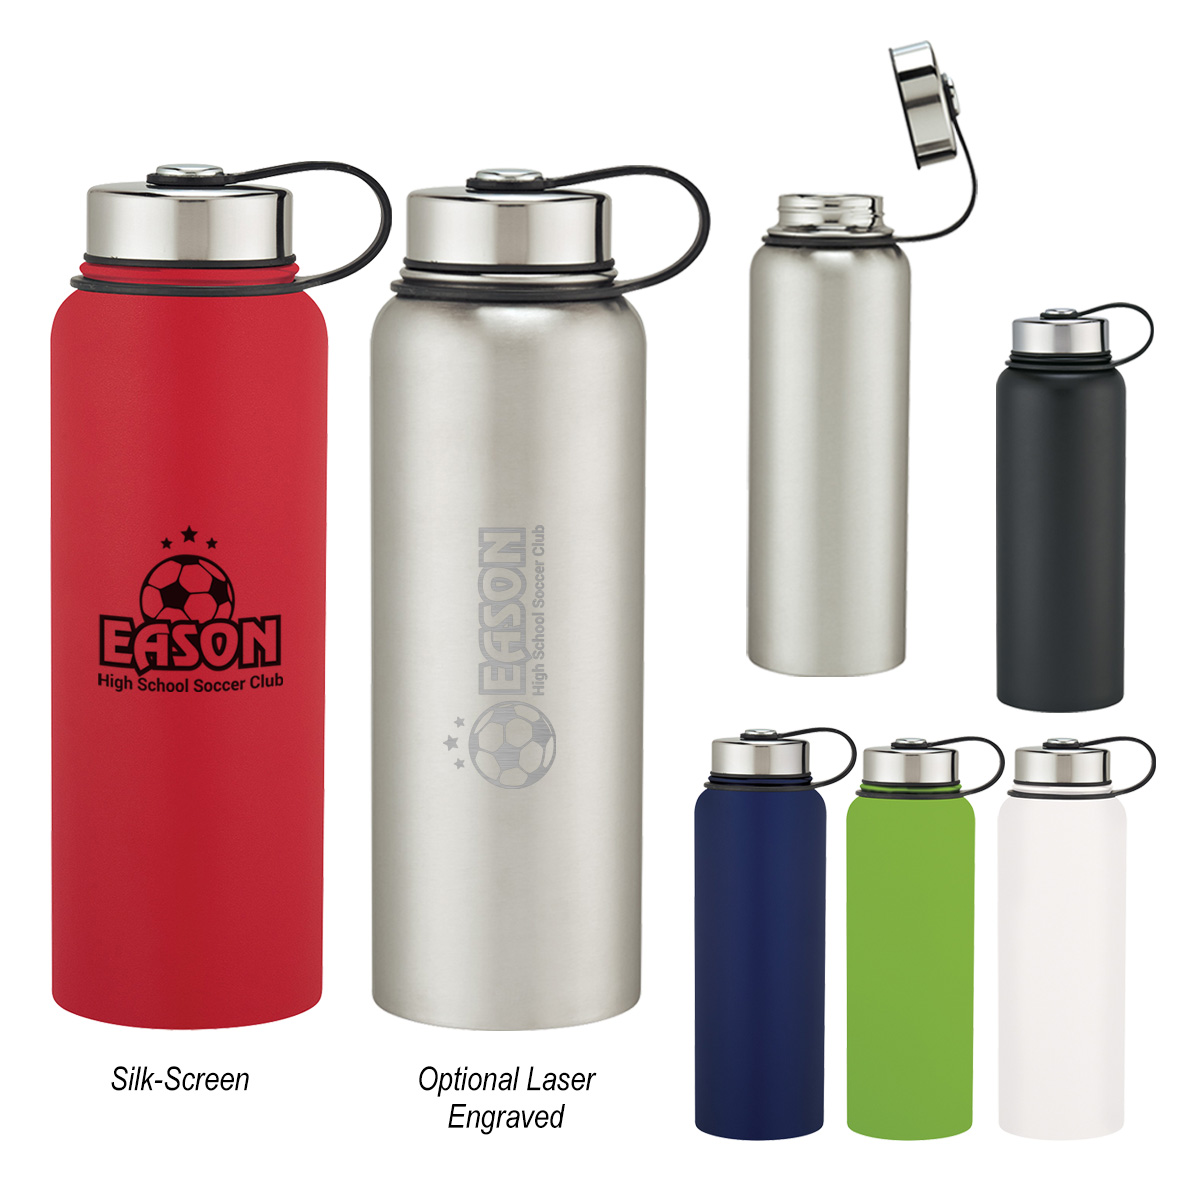 Double Wall Stainless Steel Water Bottle 40 ounce Large Capacity Reusable Insulated Water Bottle